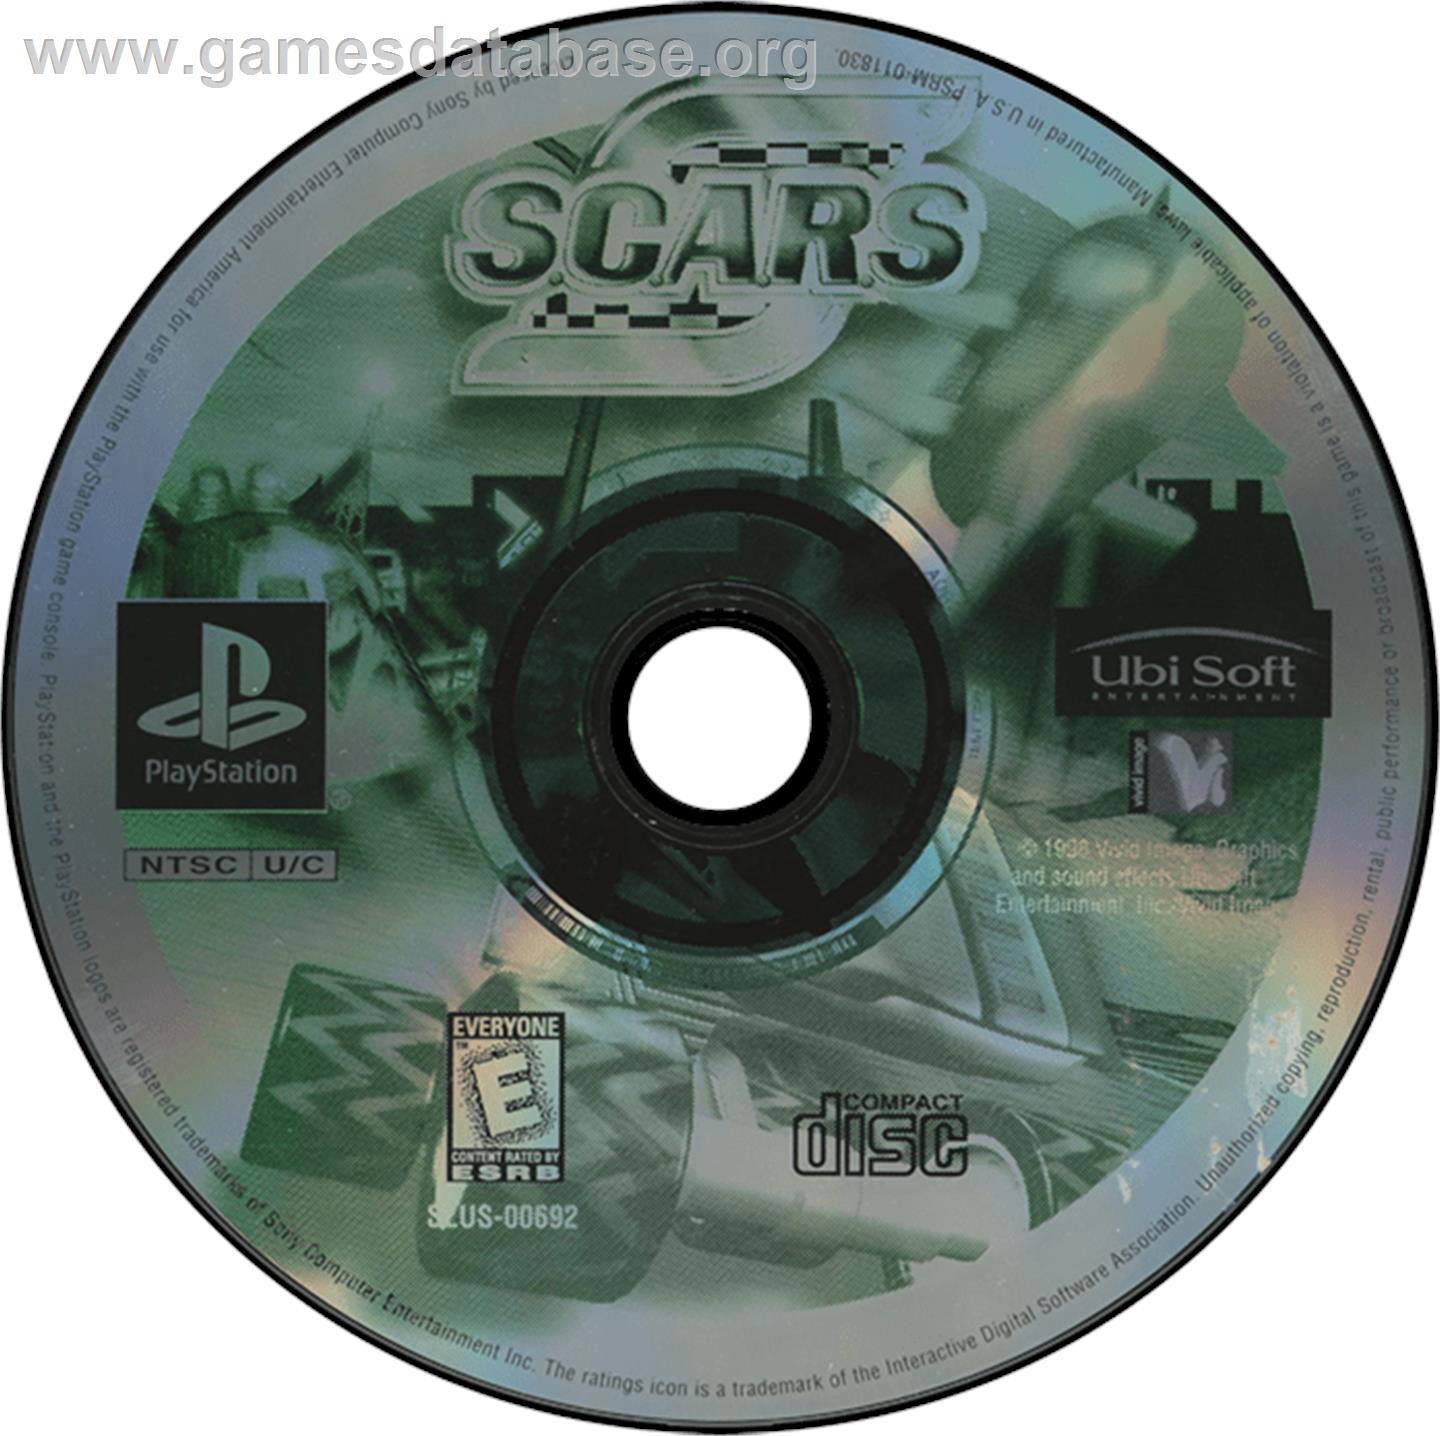 S.C.A.R.S. (Super Computer Animal Racing Simulation) - Sony Playstation - Artwork - Disc